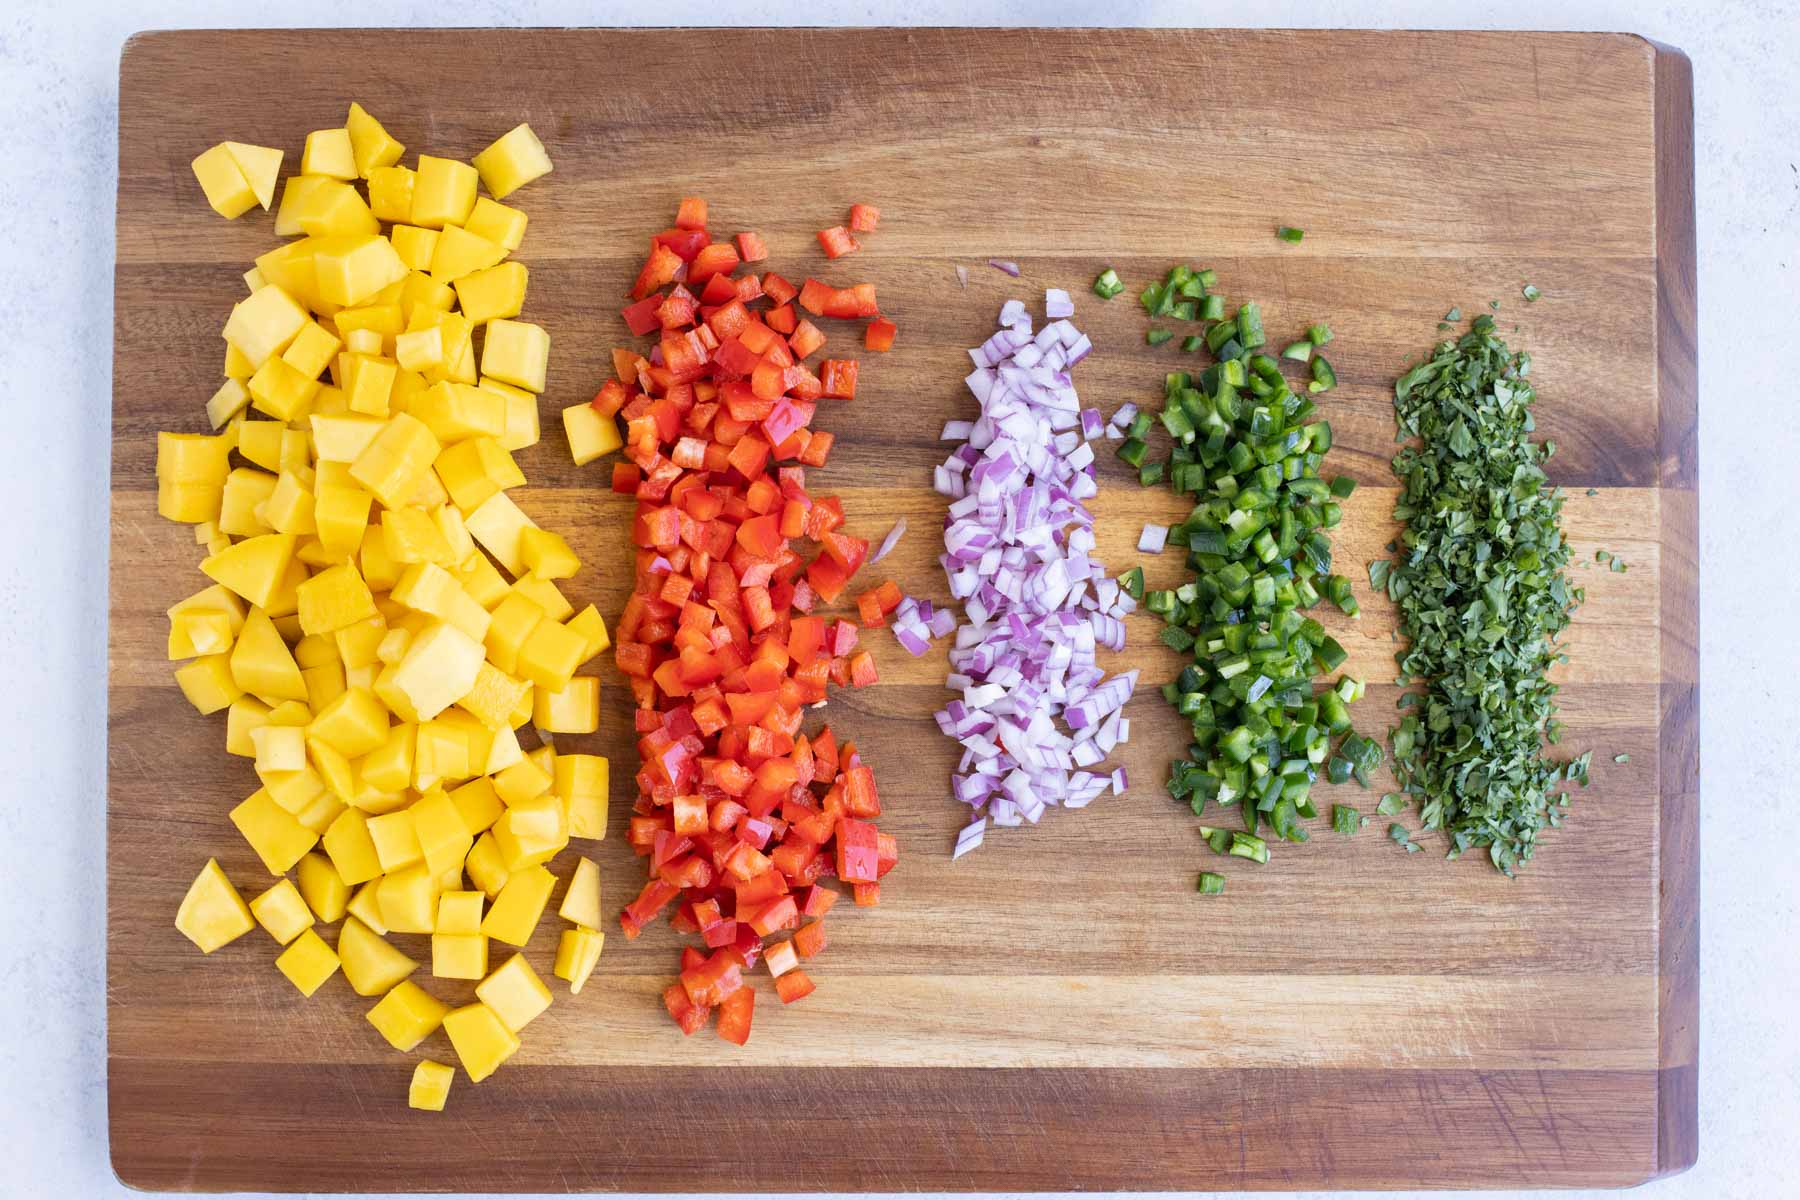 All ingredients are chopped and diced on a cutting board.